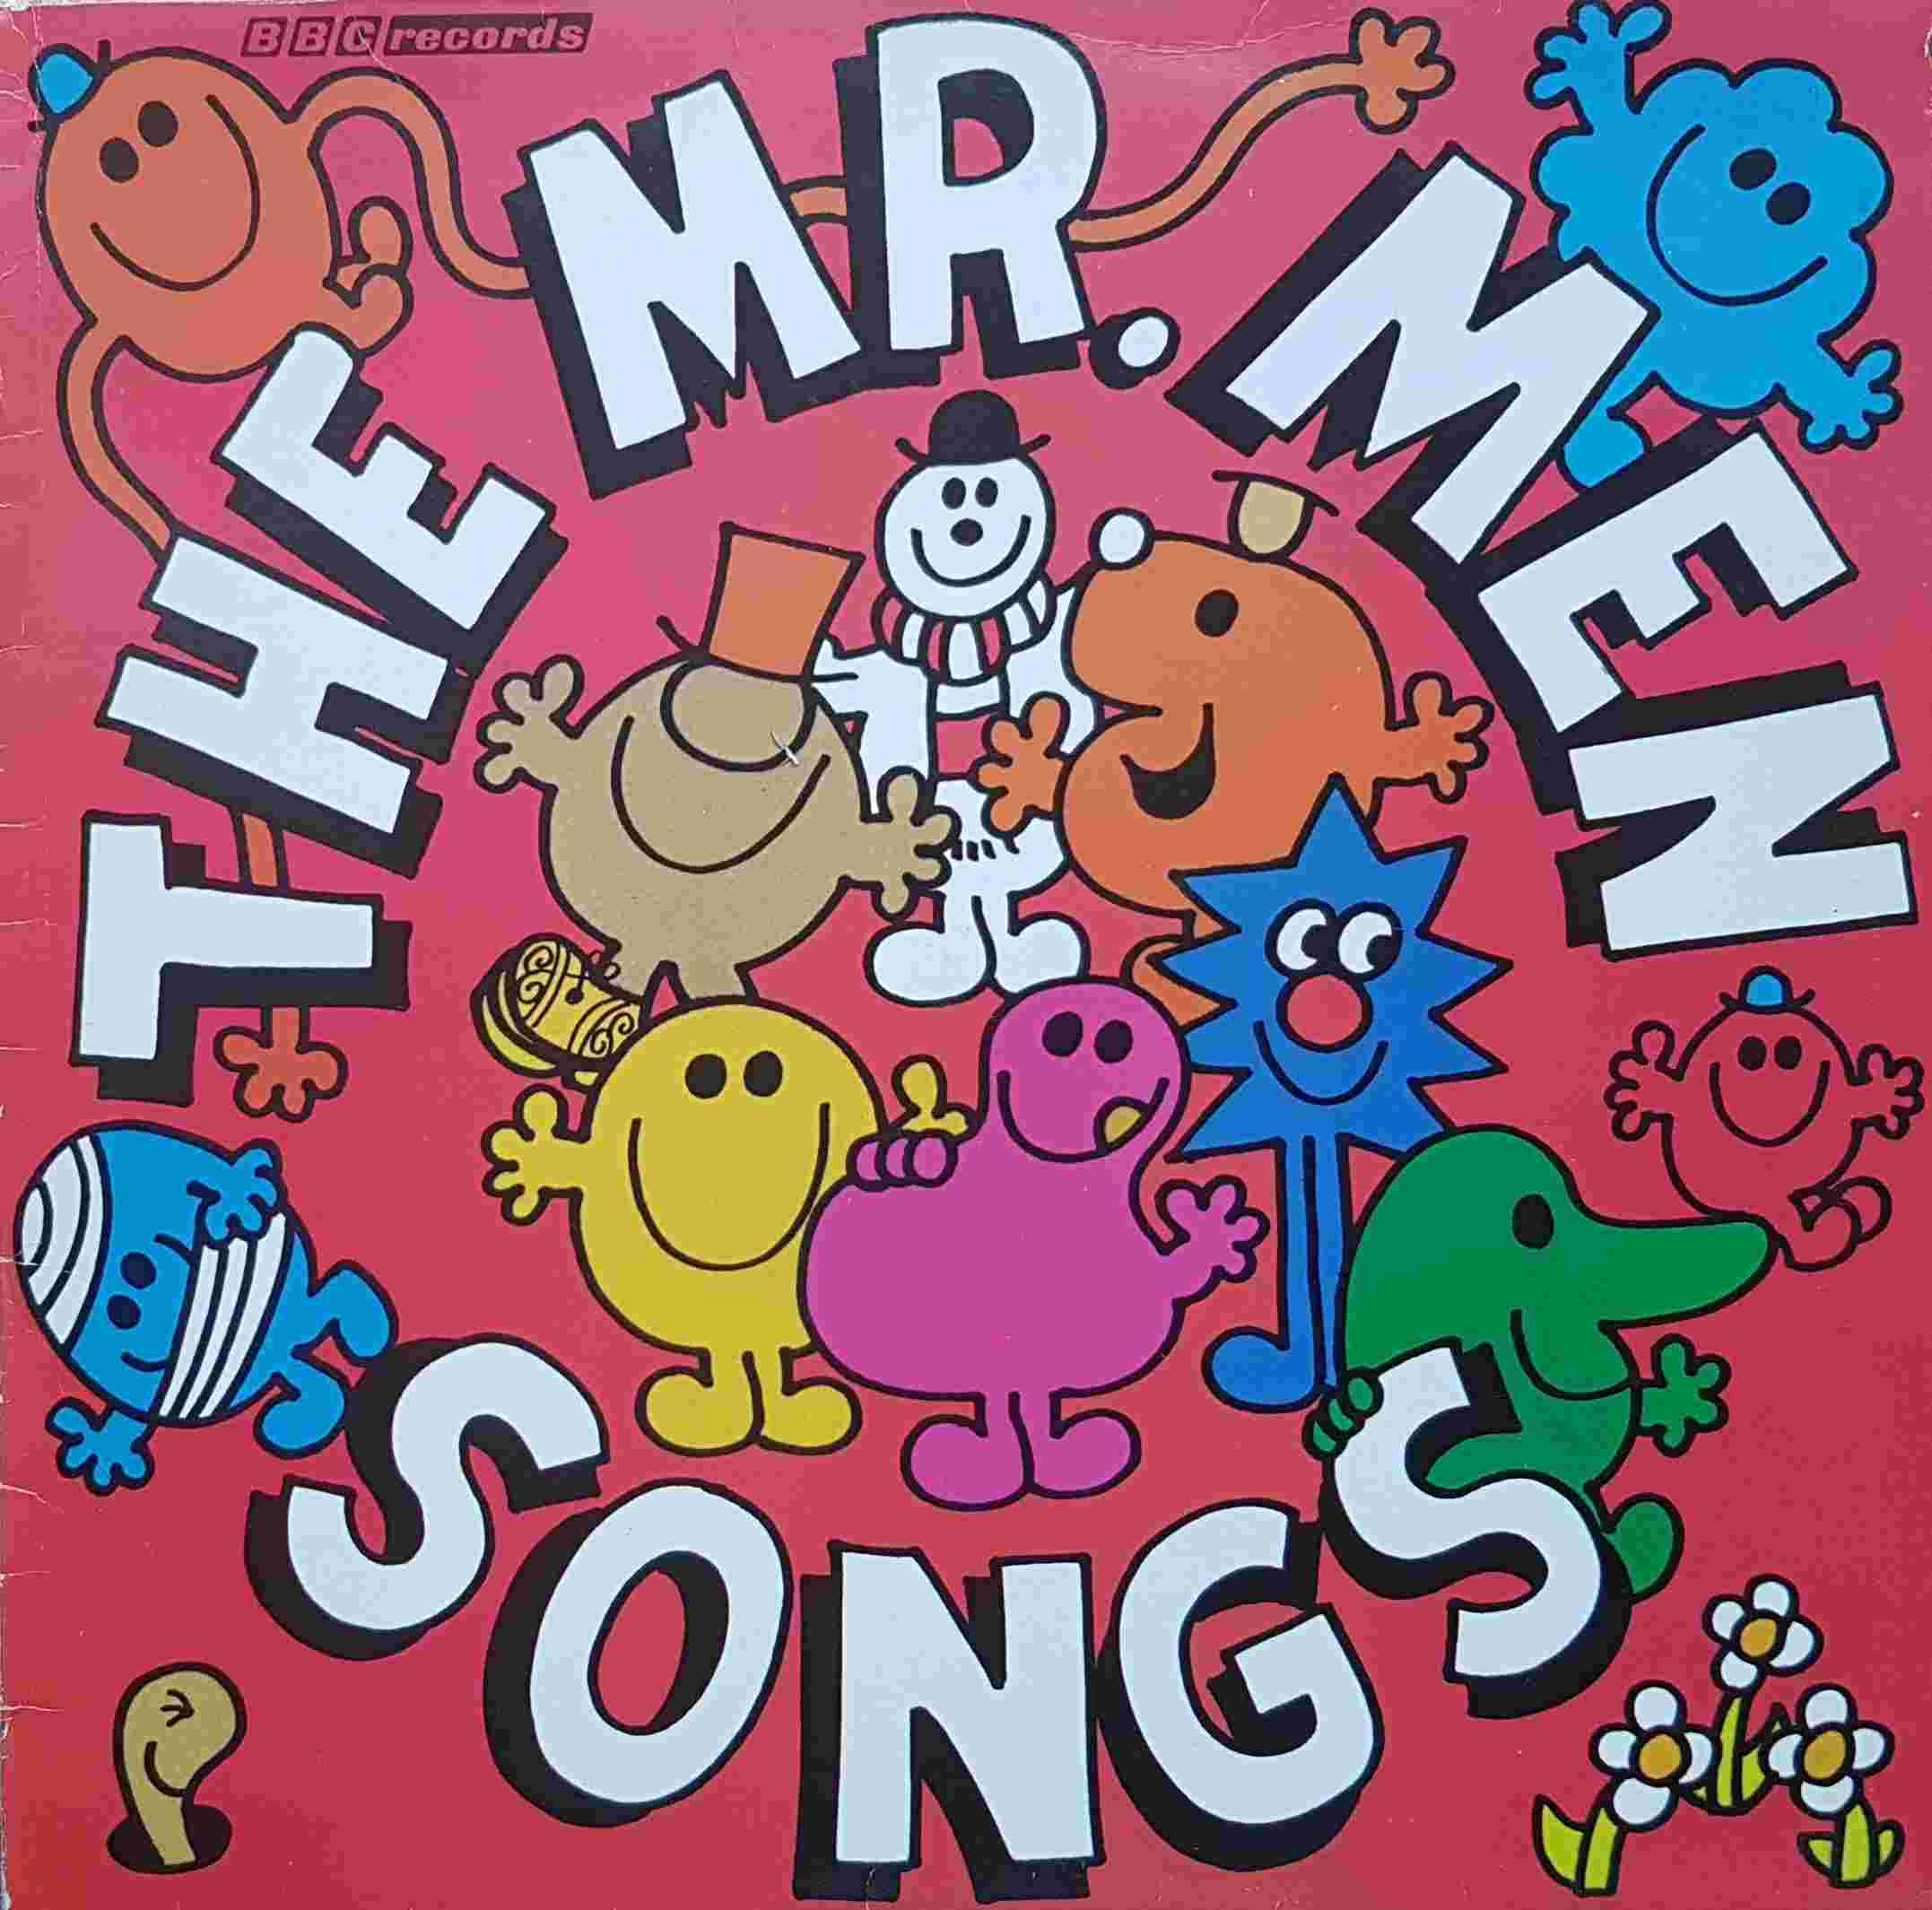 Picture of REC 345 The Mr. Men songs by artist Arthur Lowe from the BBC albums - Records and Tapes library